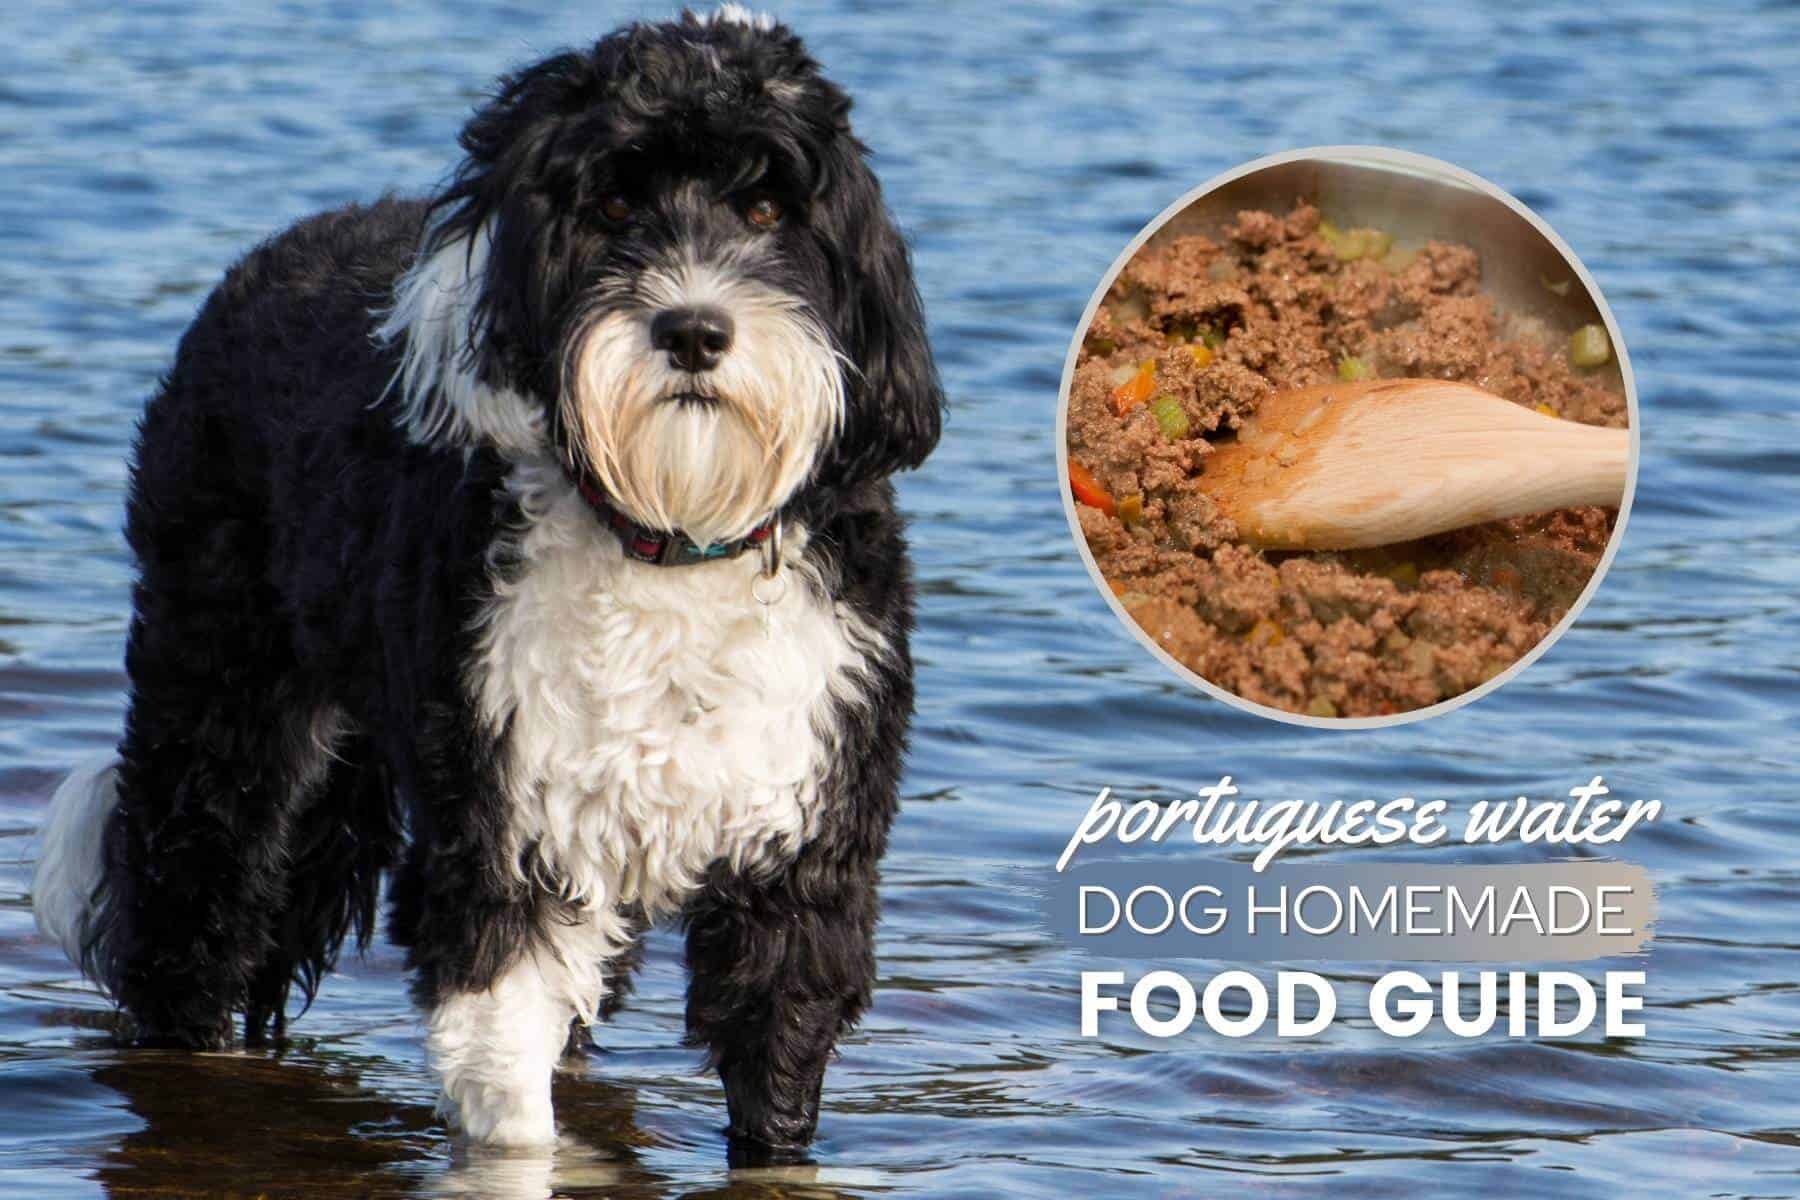 Portuguese water dog homemade food